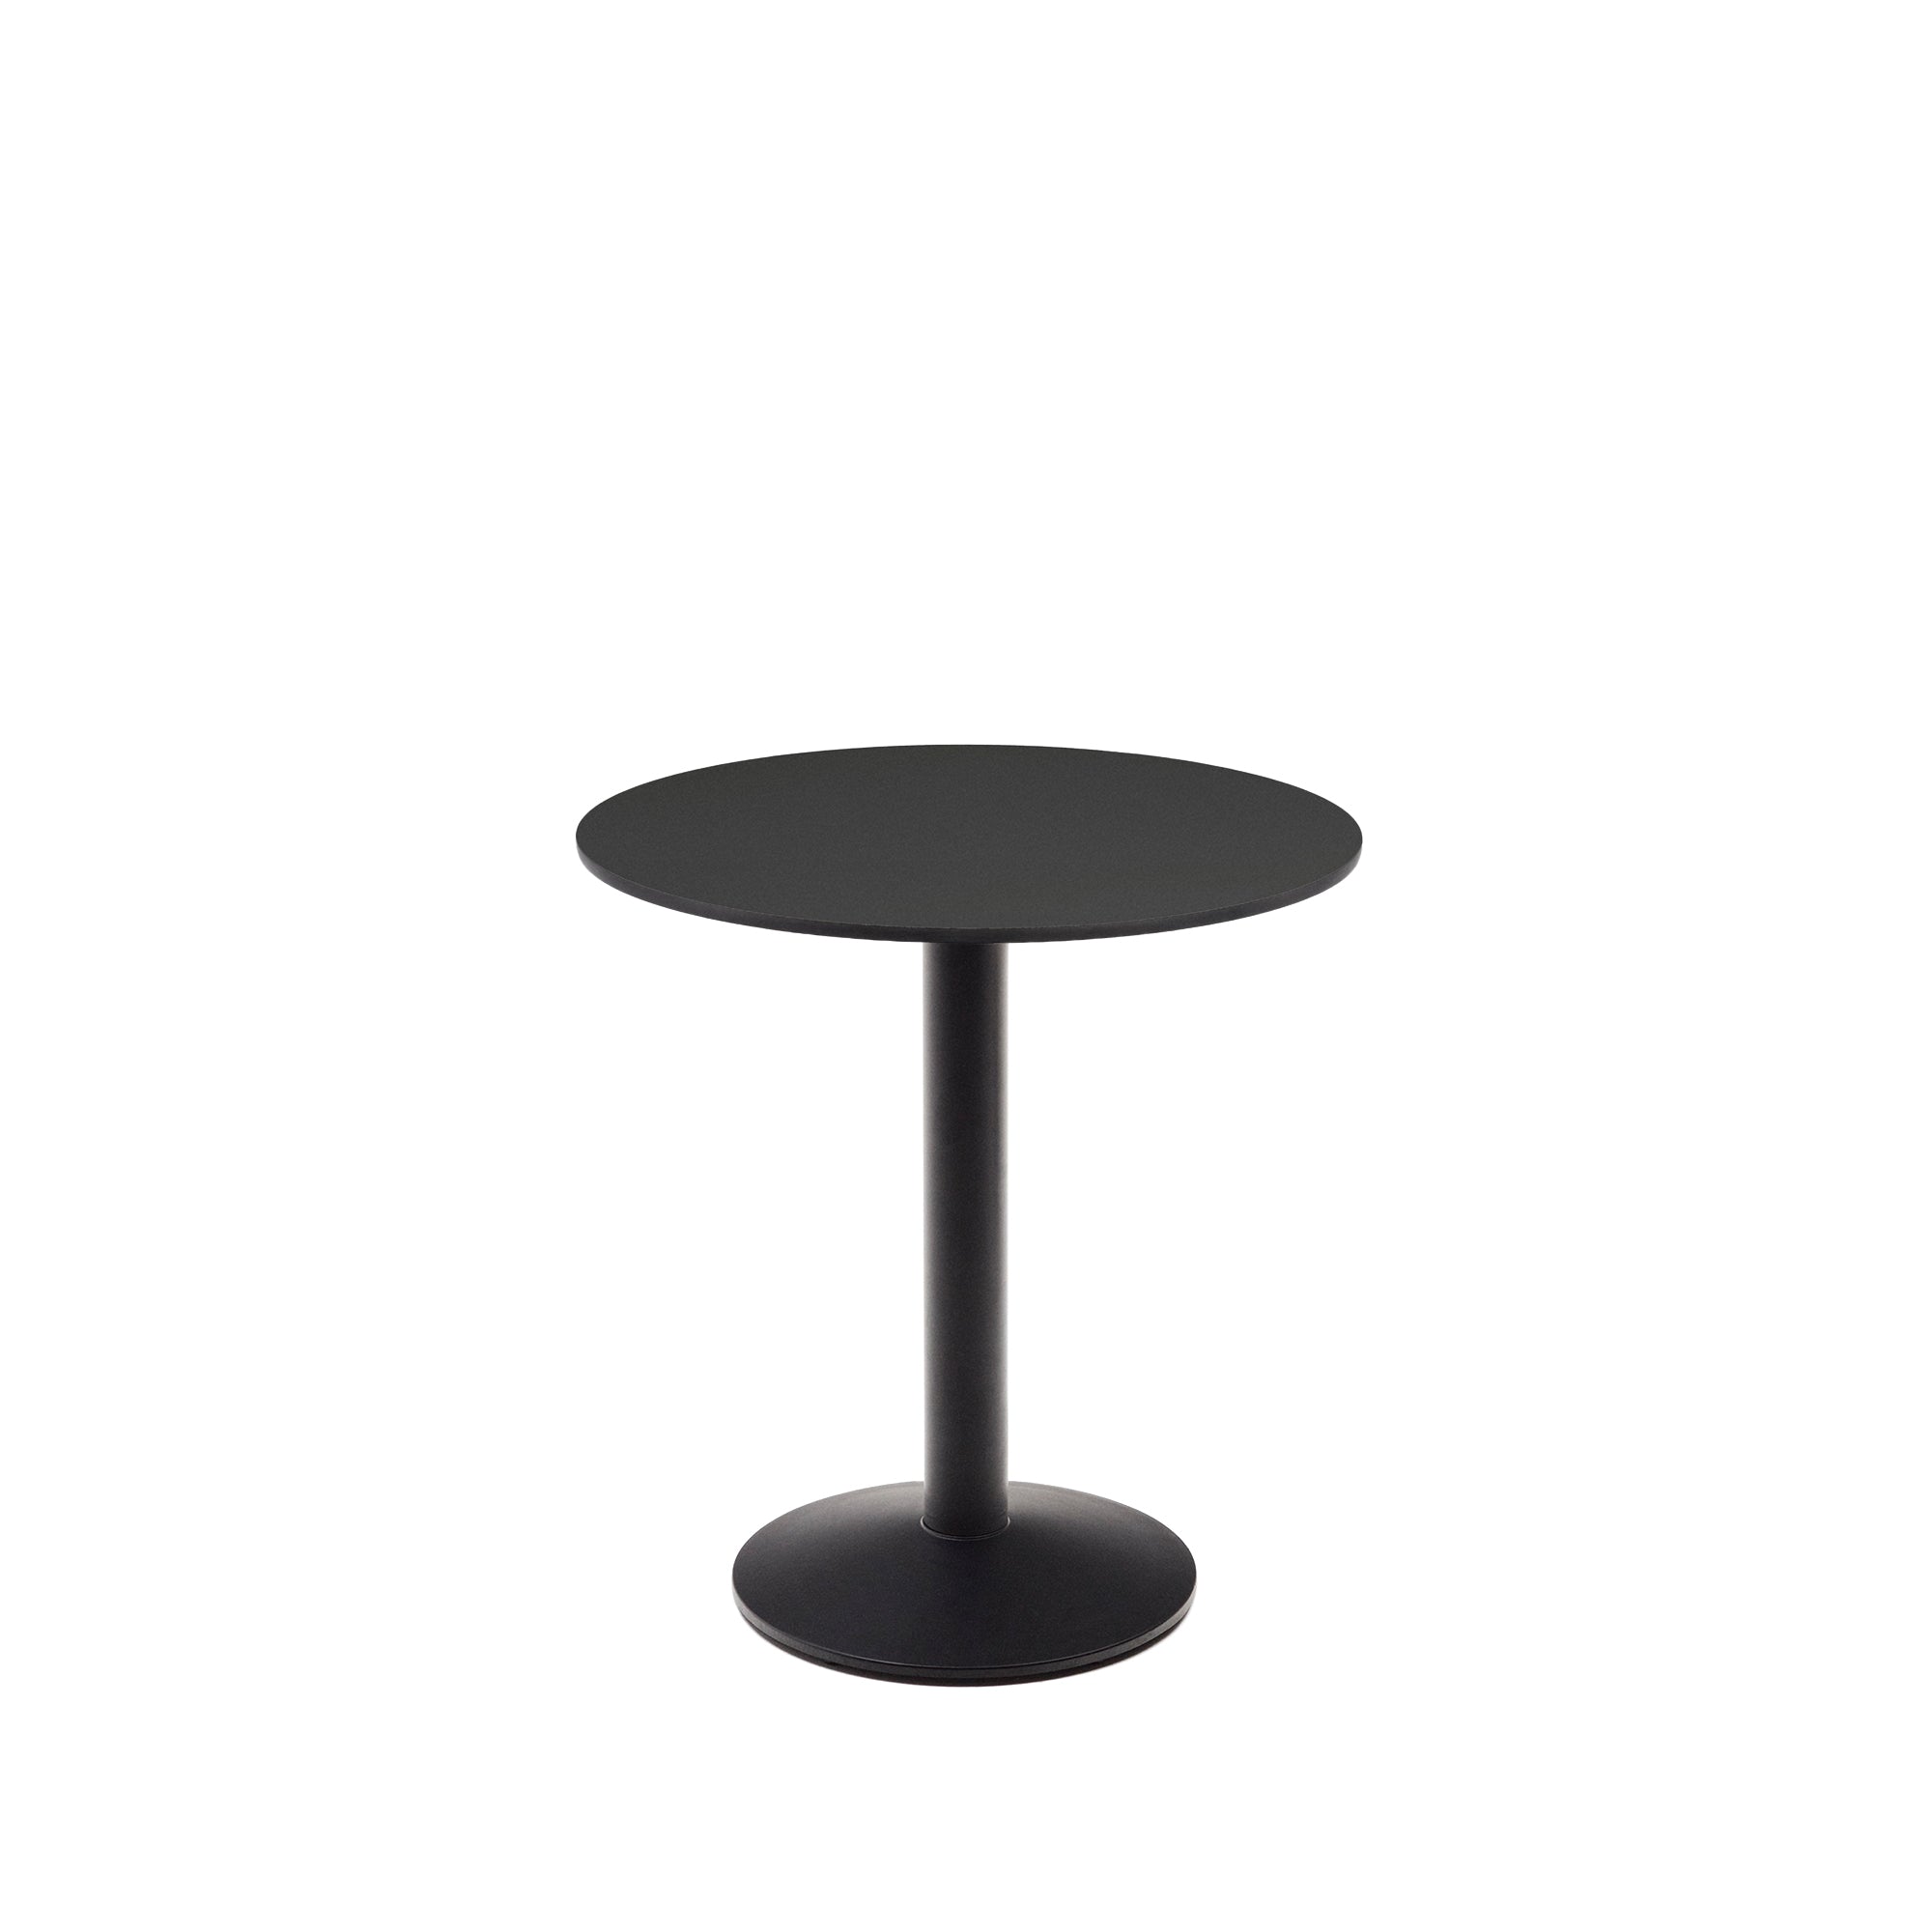 Esilda round outdoor table in black with metal leg in a painted black finish, Ø 70 x 70 cm